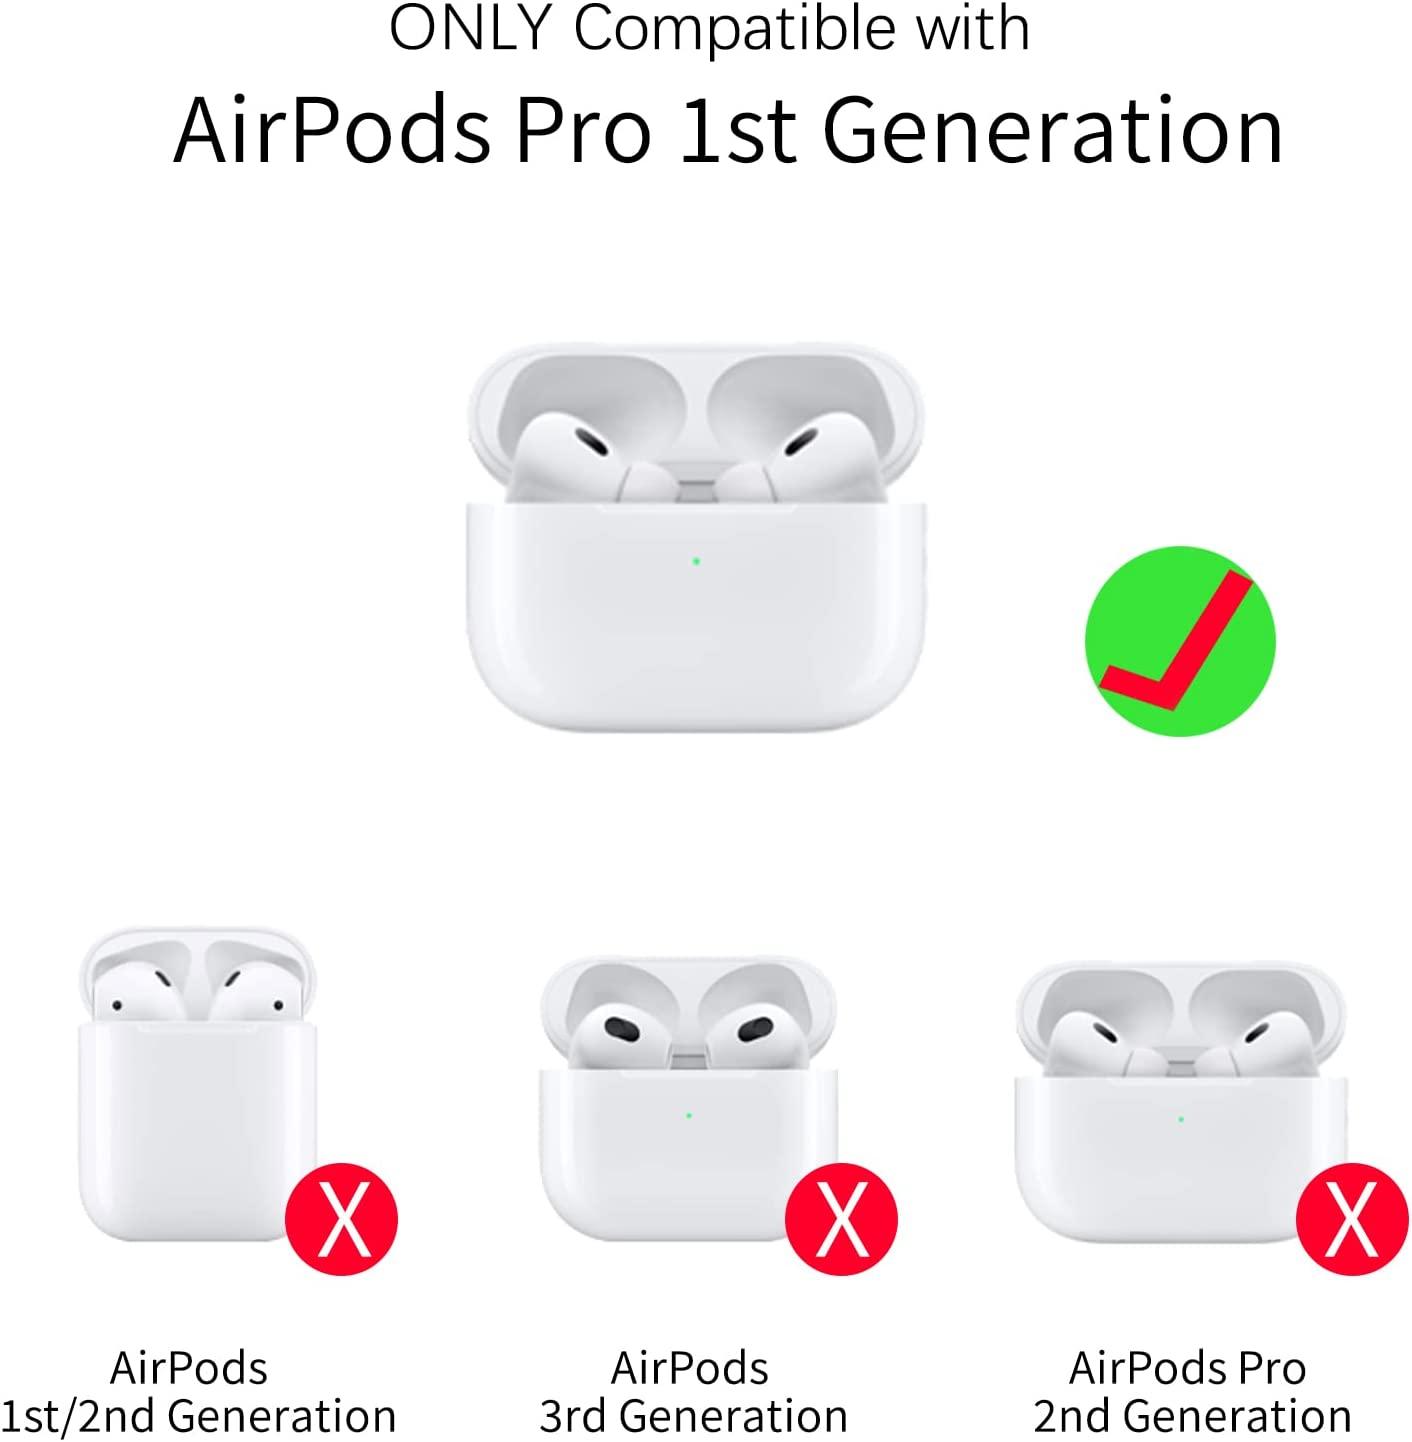 AirPods Pro 1st Generation Contemporary Cover, Hibiscus and Sunflower - Berkin Arts